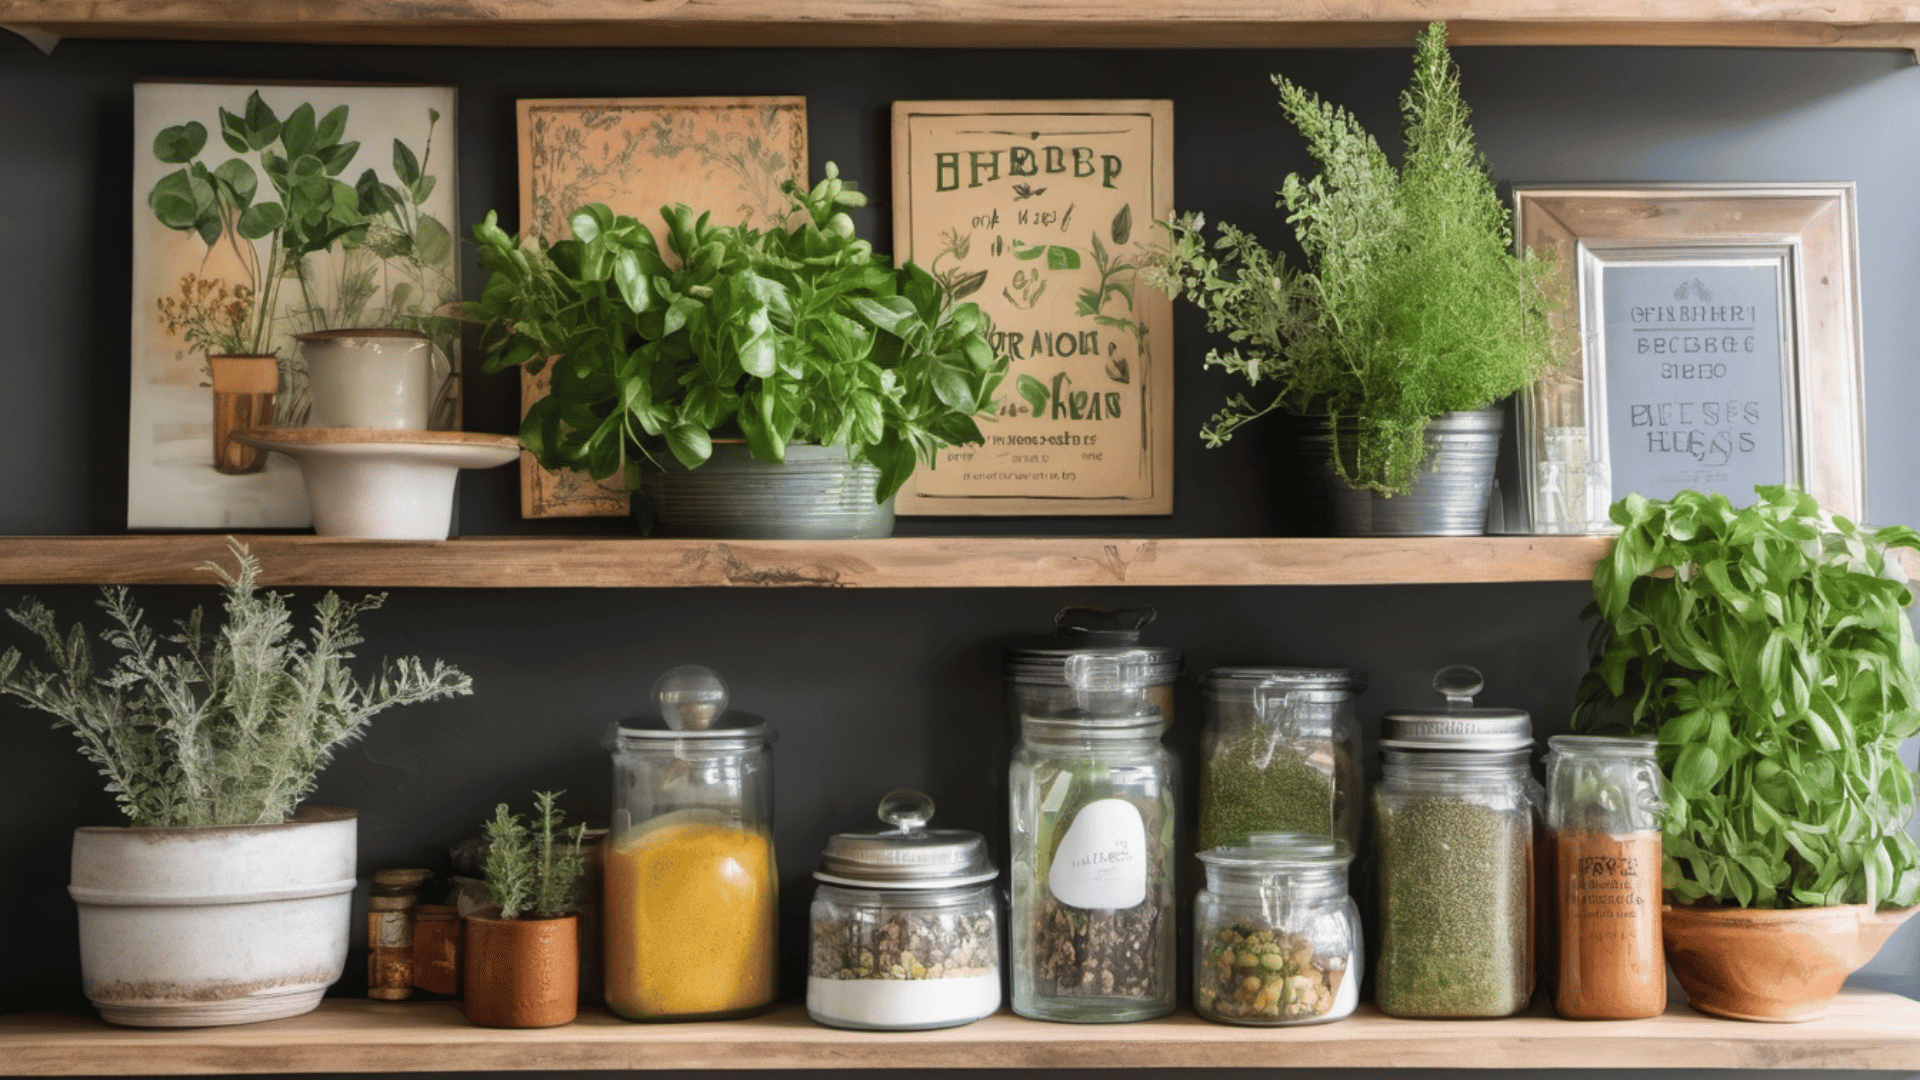 Essential items to include in kitchen shelf decor